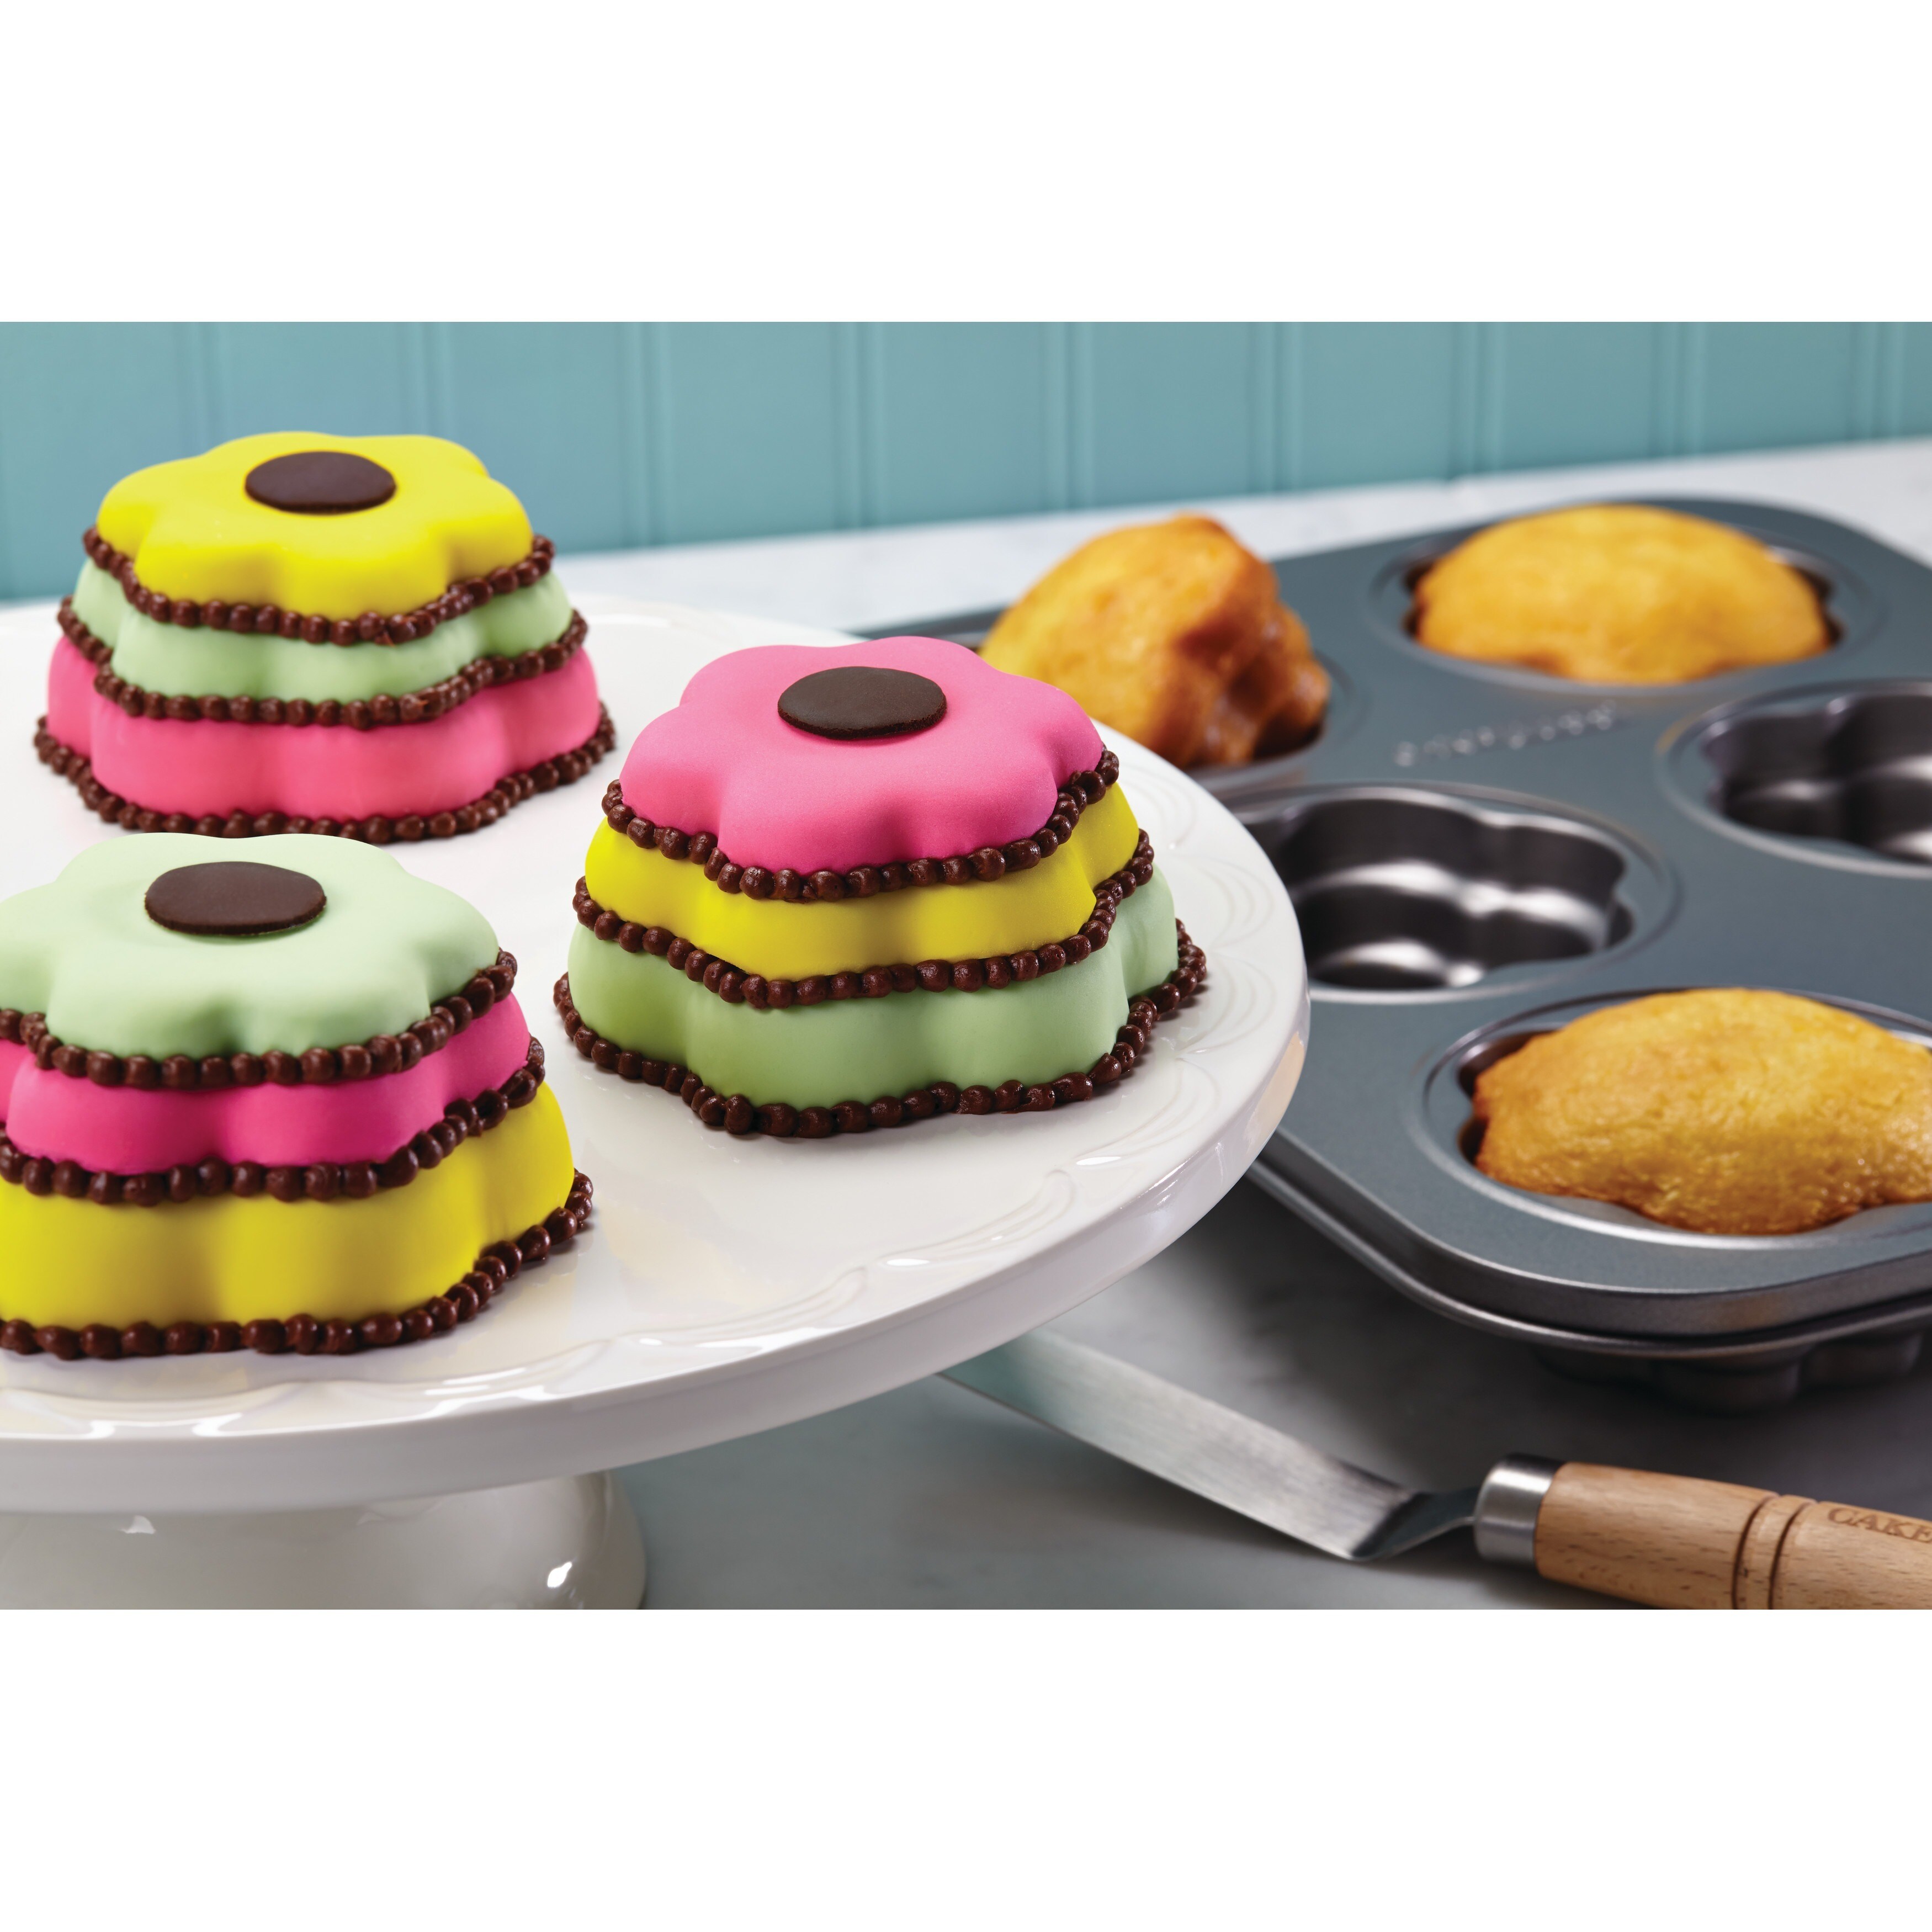 Bakeware - Cake & Muffin Pans - Novelty & Specialty Pans - The